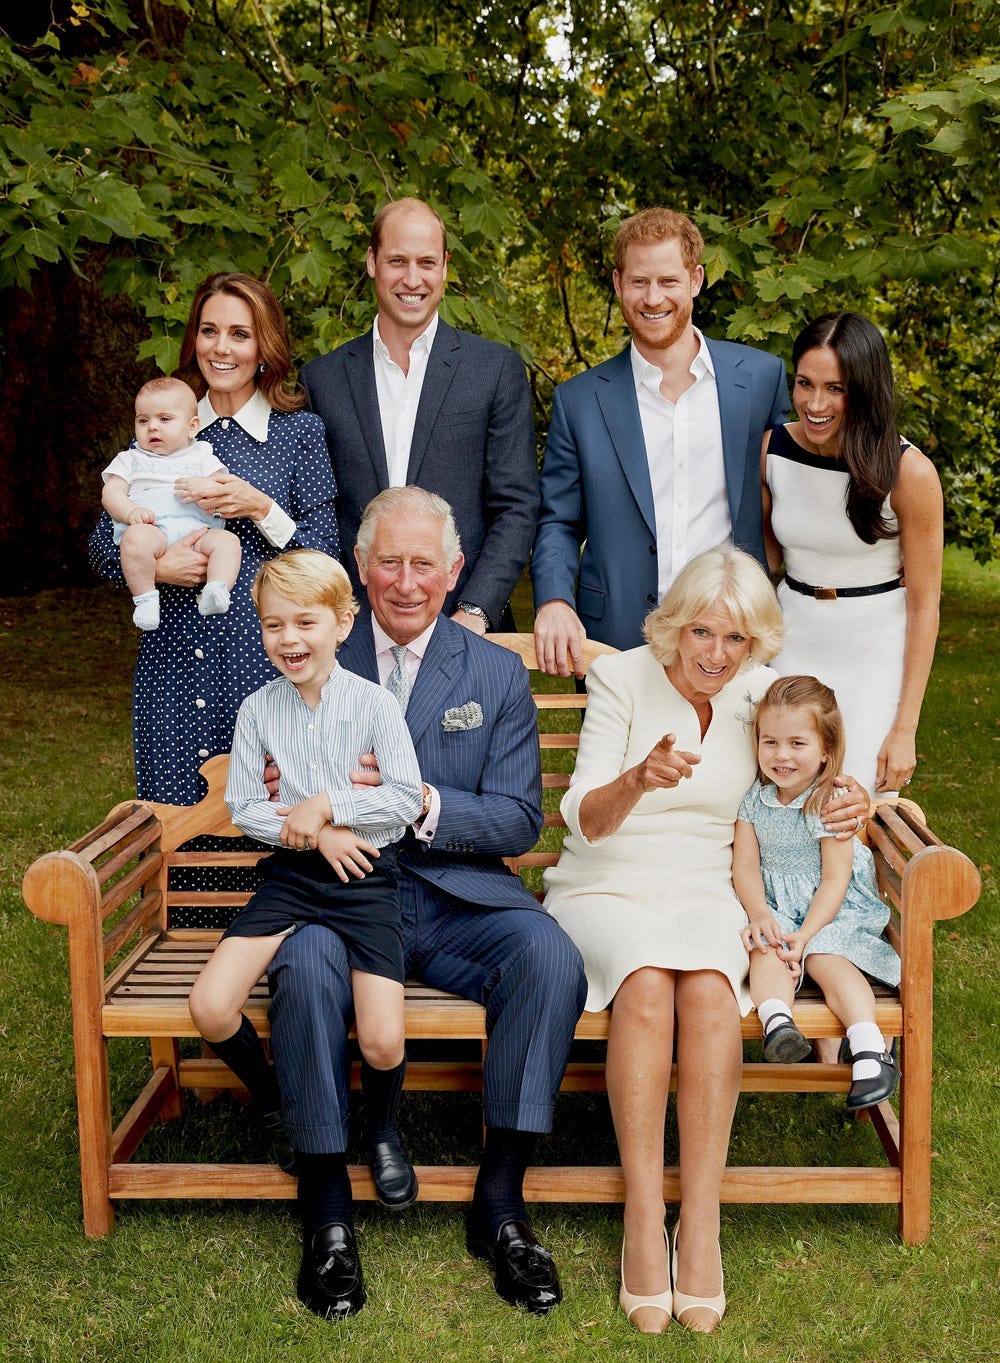 Royal Photographer Shares His Favorite Photos of Royals' Family Life